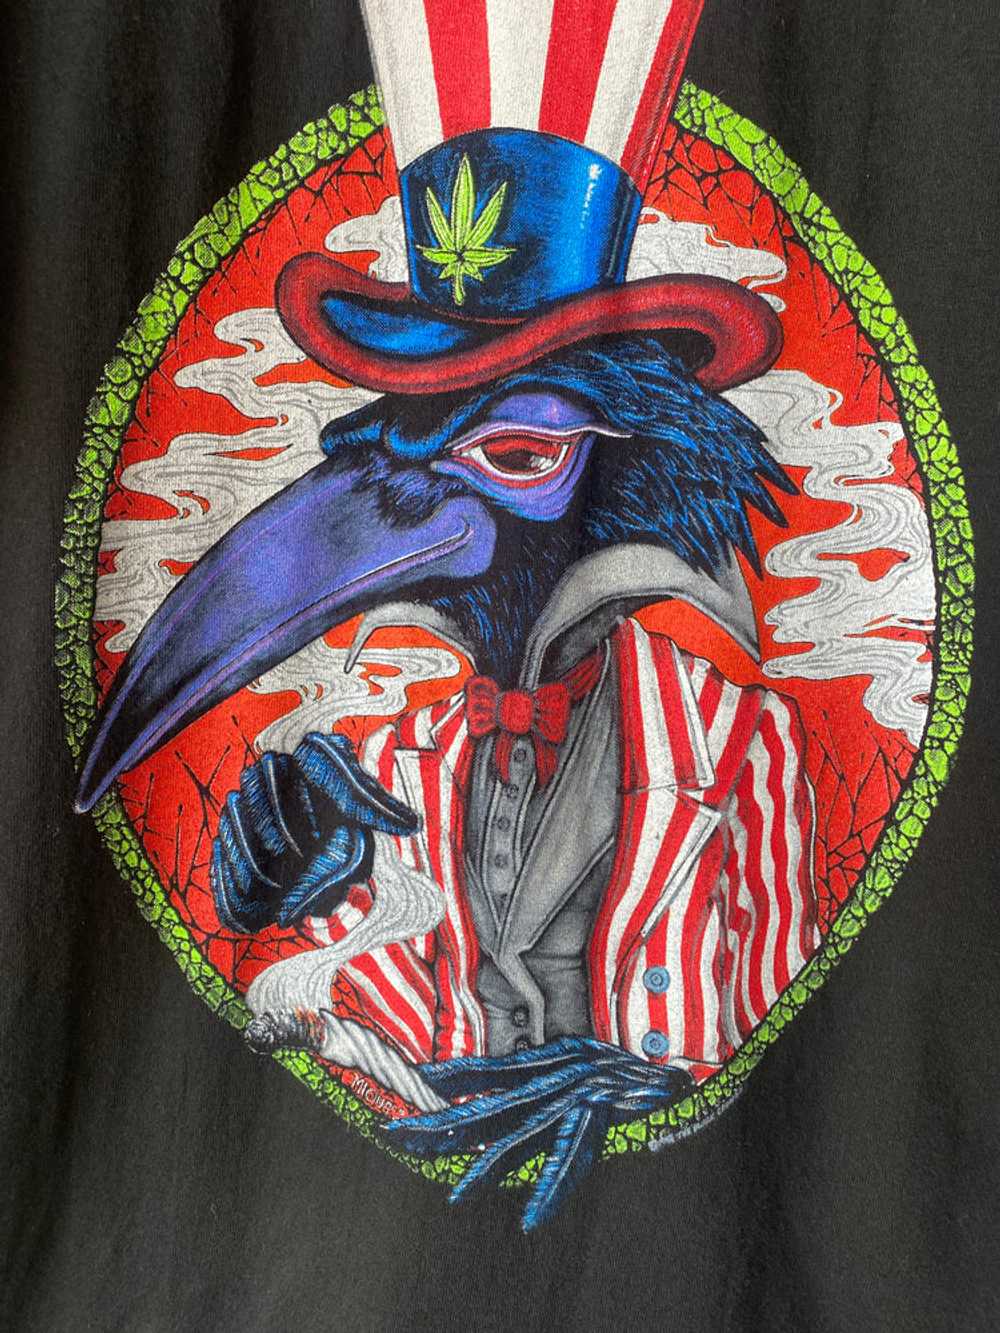 The Black Crowes HIgh as the Moon Tour T-shirt - image 3